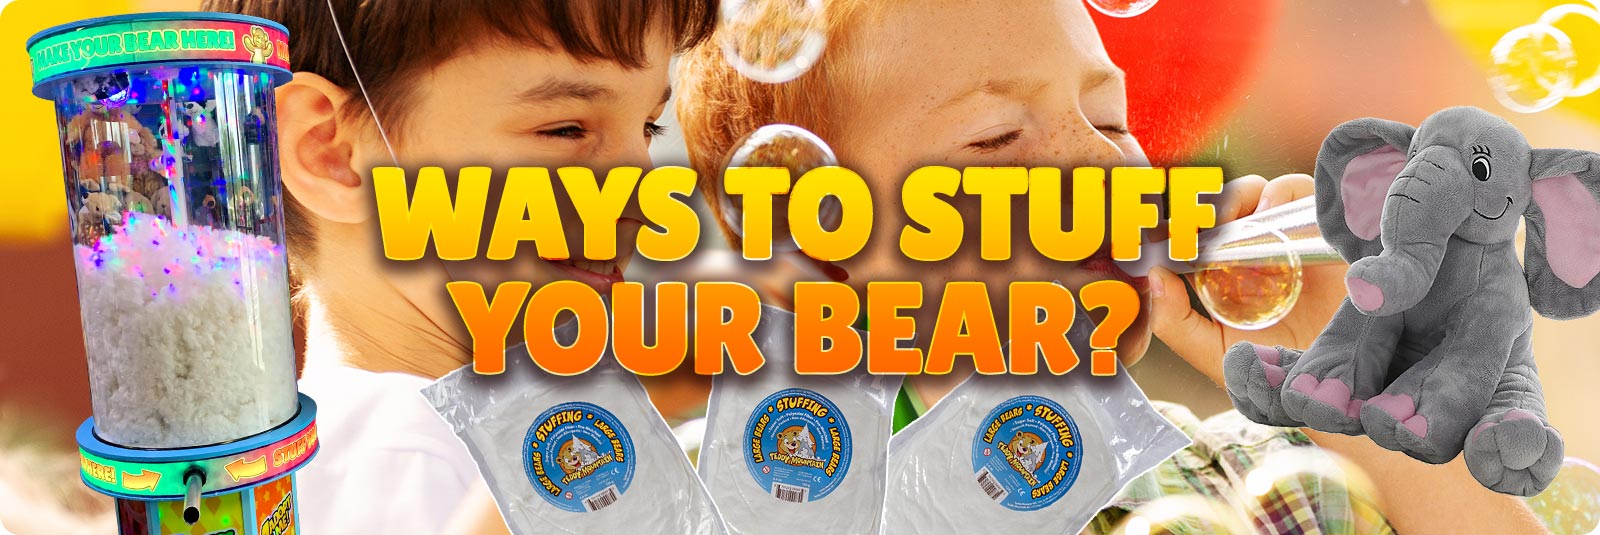 WAYS TO STUFF YOUR BEAR text over an image of 2 pre-teen boys blowing bubbles, a stuffinator stuffing machine, vacuum sealed fiber packs and an elephant plush toy on top